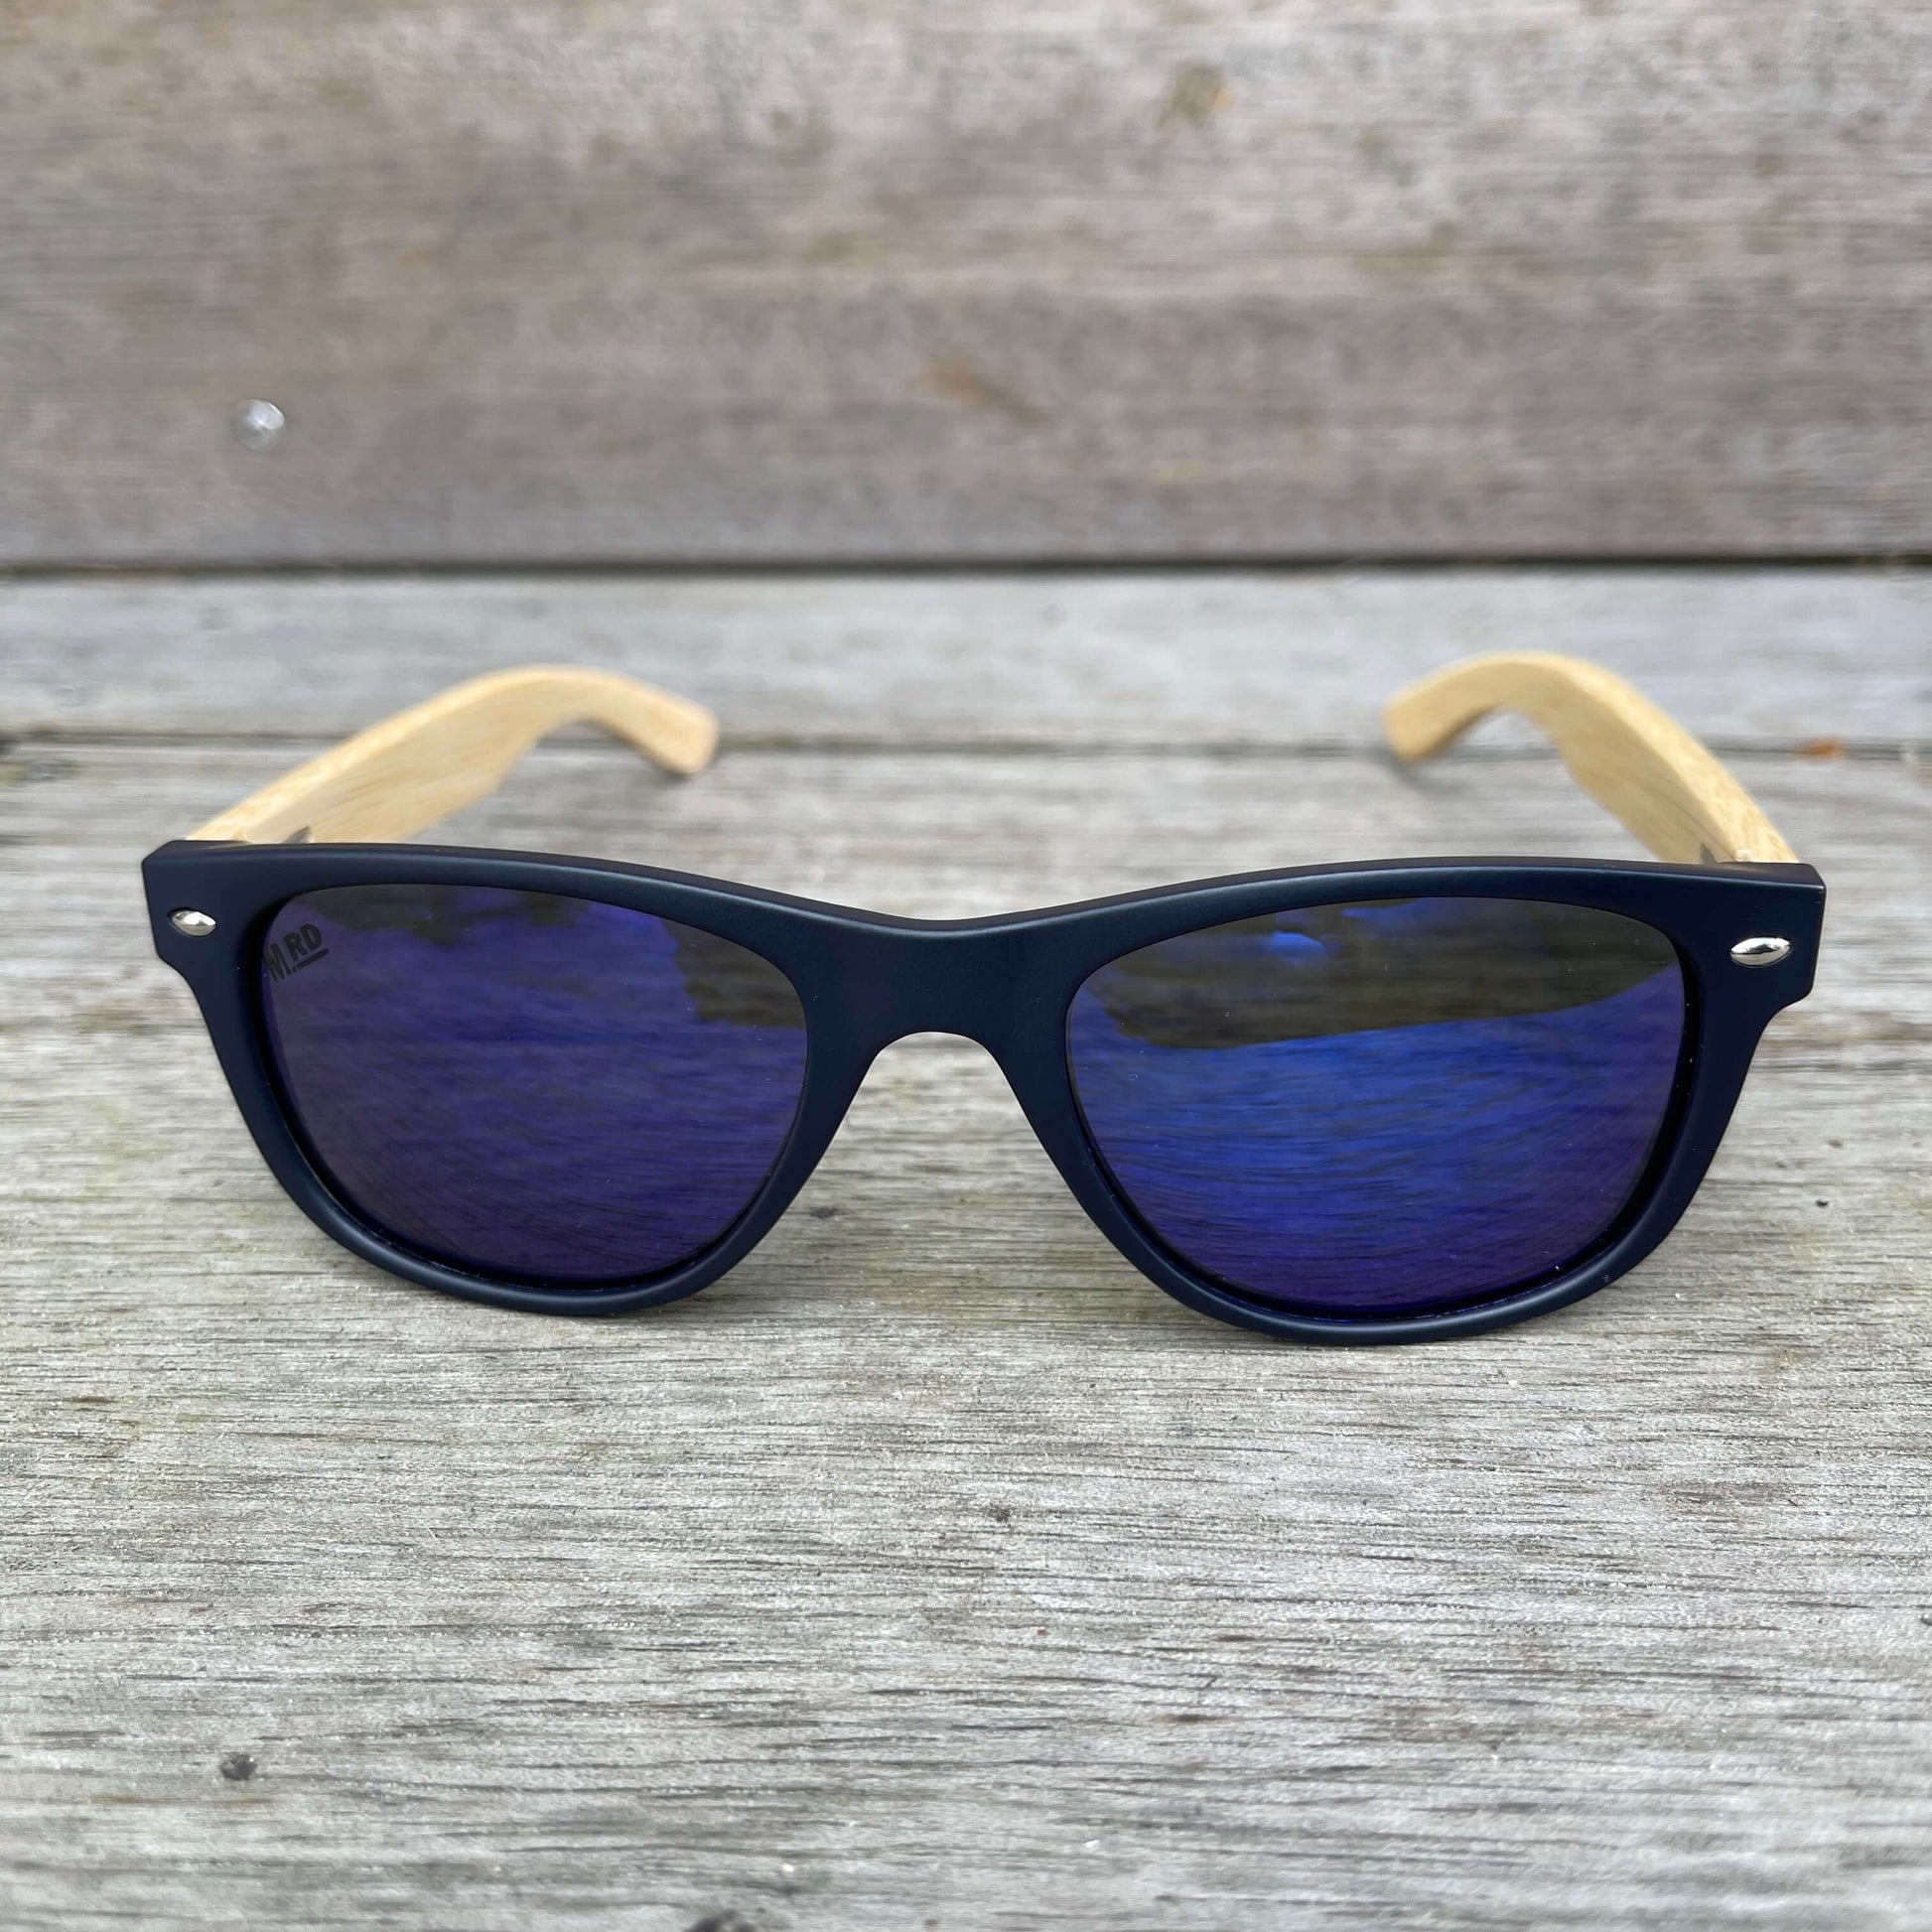 Kids sunglasses with Navy blue frames, blue lenses and wooden arms.